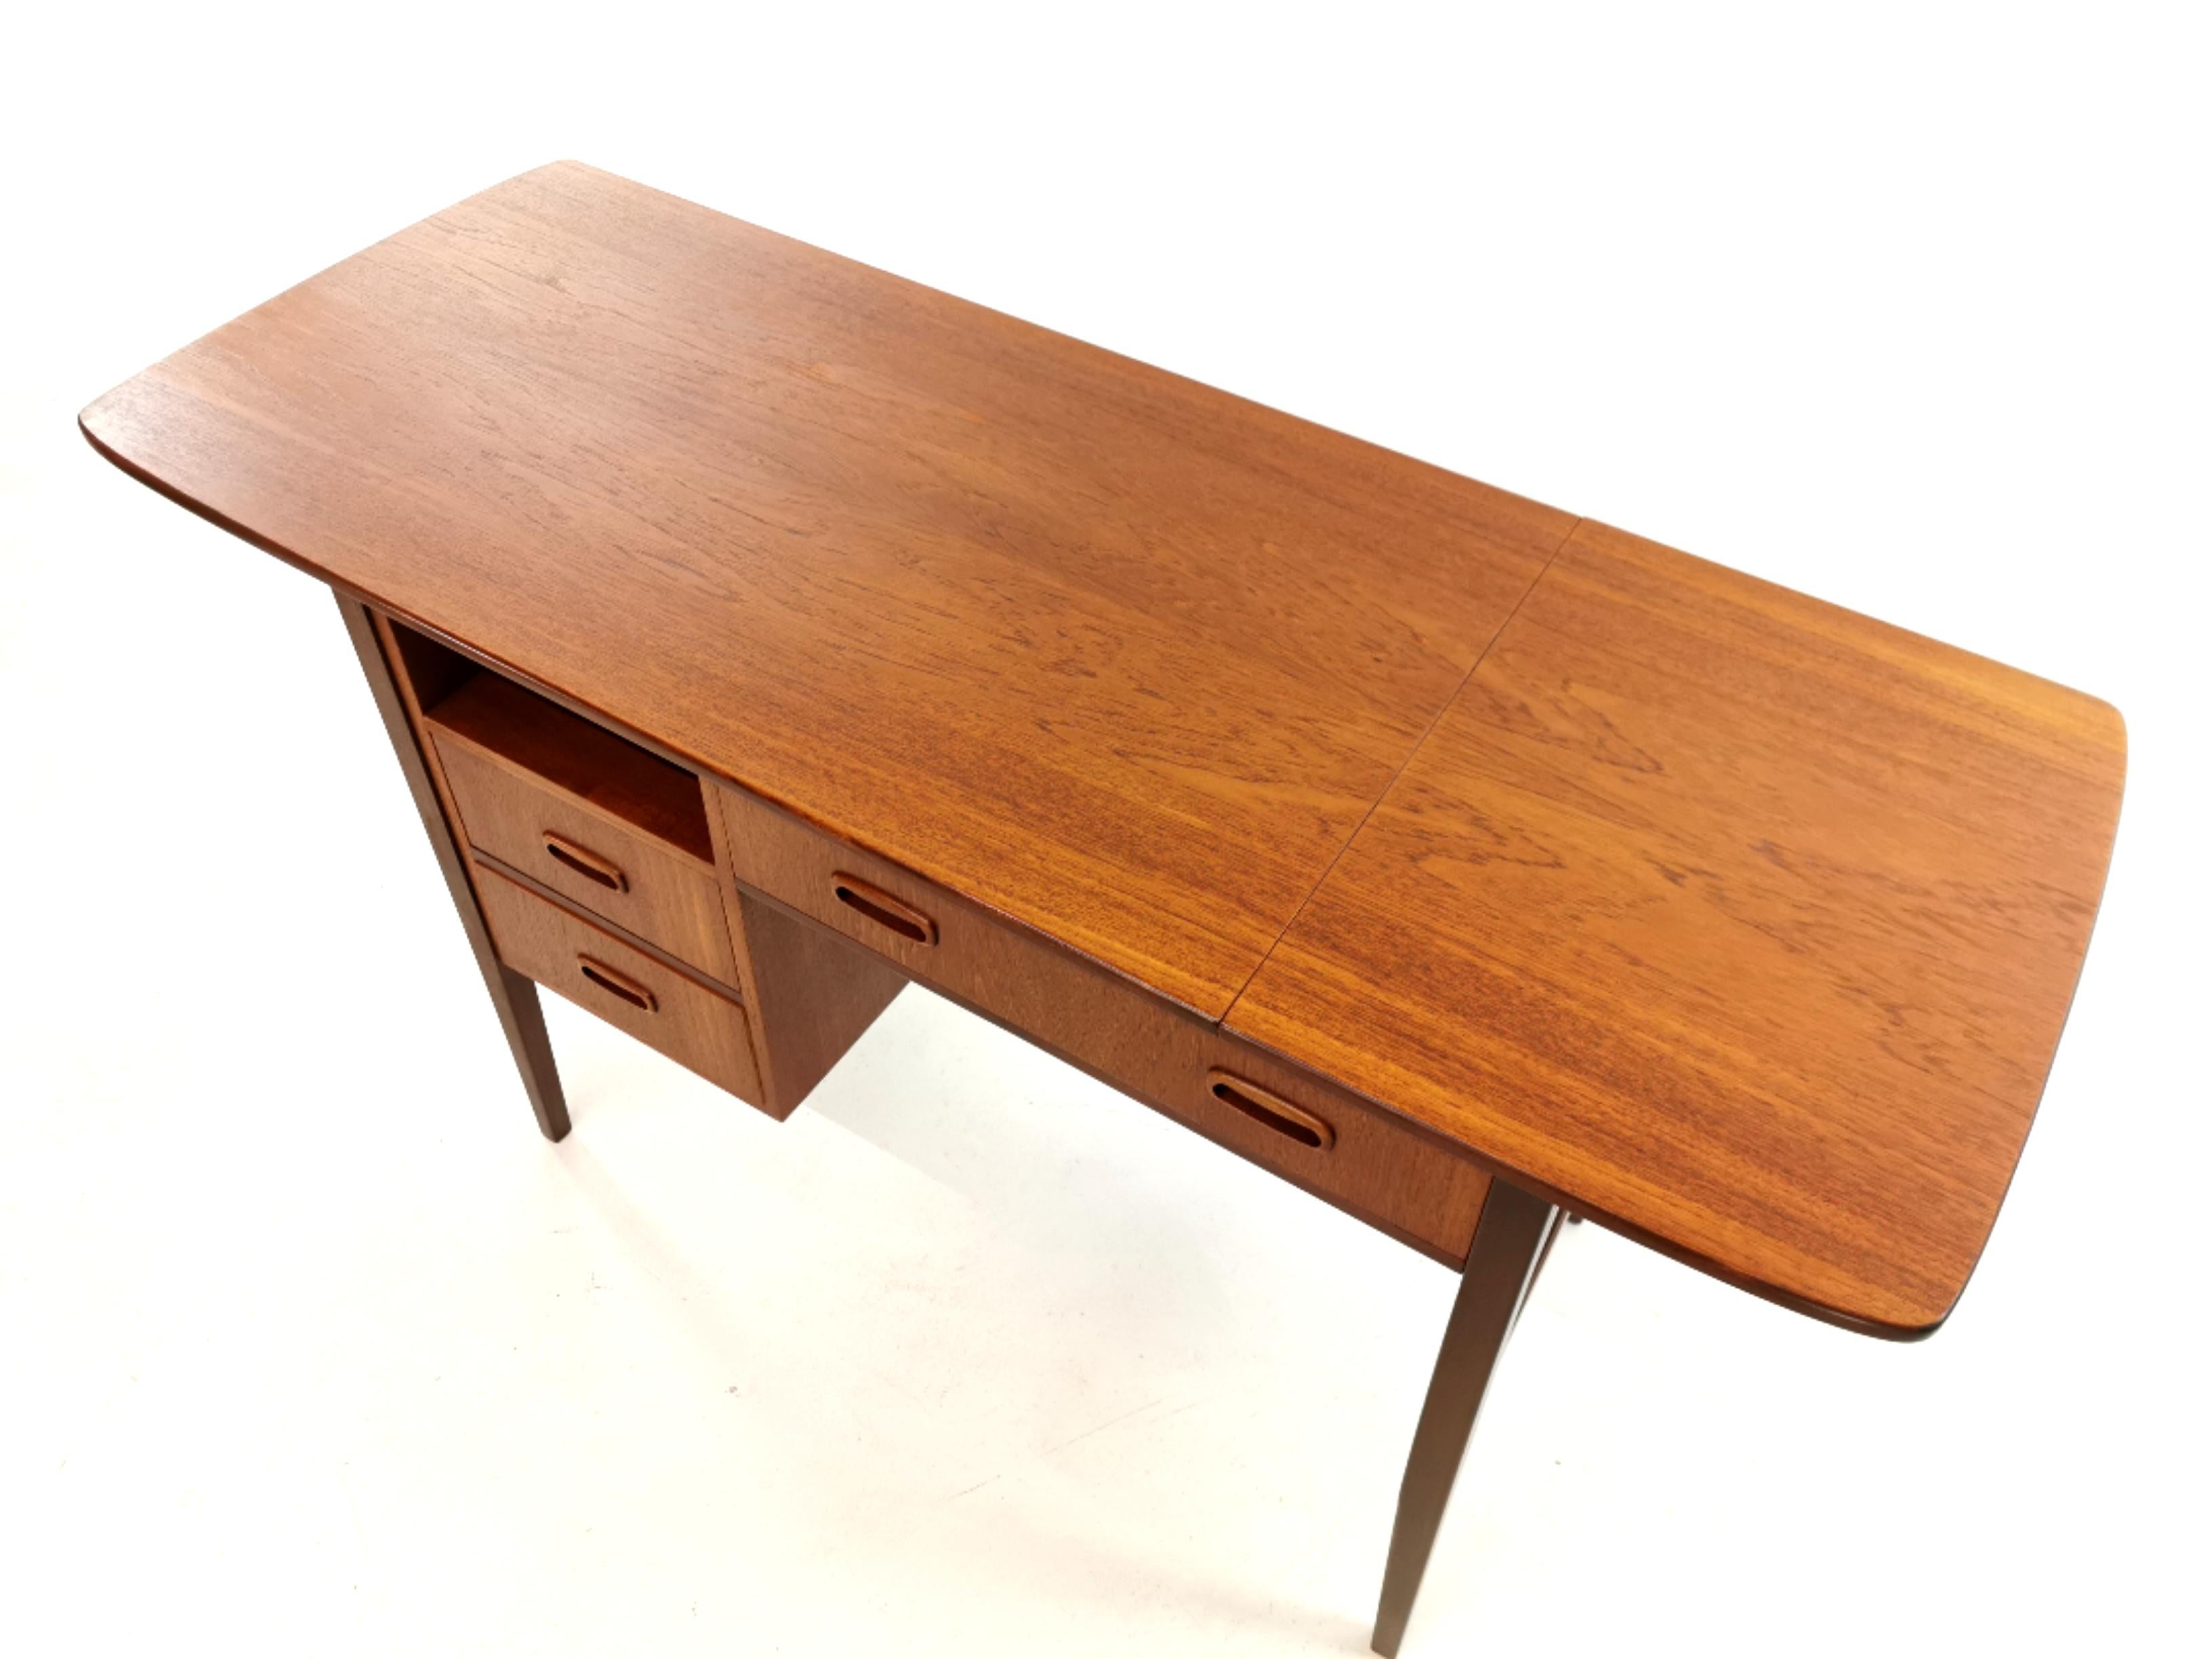 Danish style teak writing desk from the 1960s.
By London firm Grange. Made in the UK.
Compact with plenty of storage space. Features a desktop which slides left and right to raise or
lower the drop leaf.